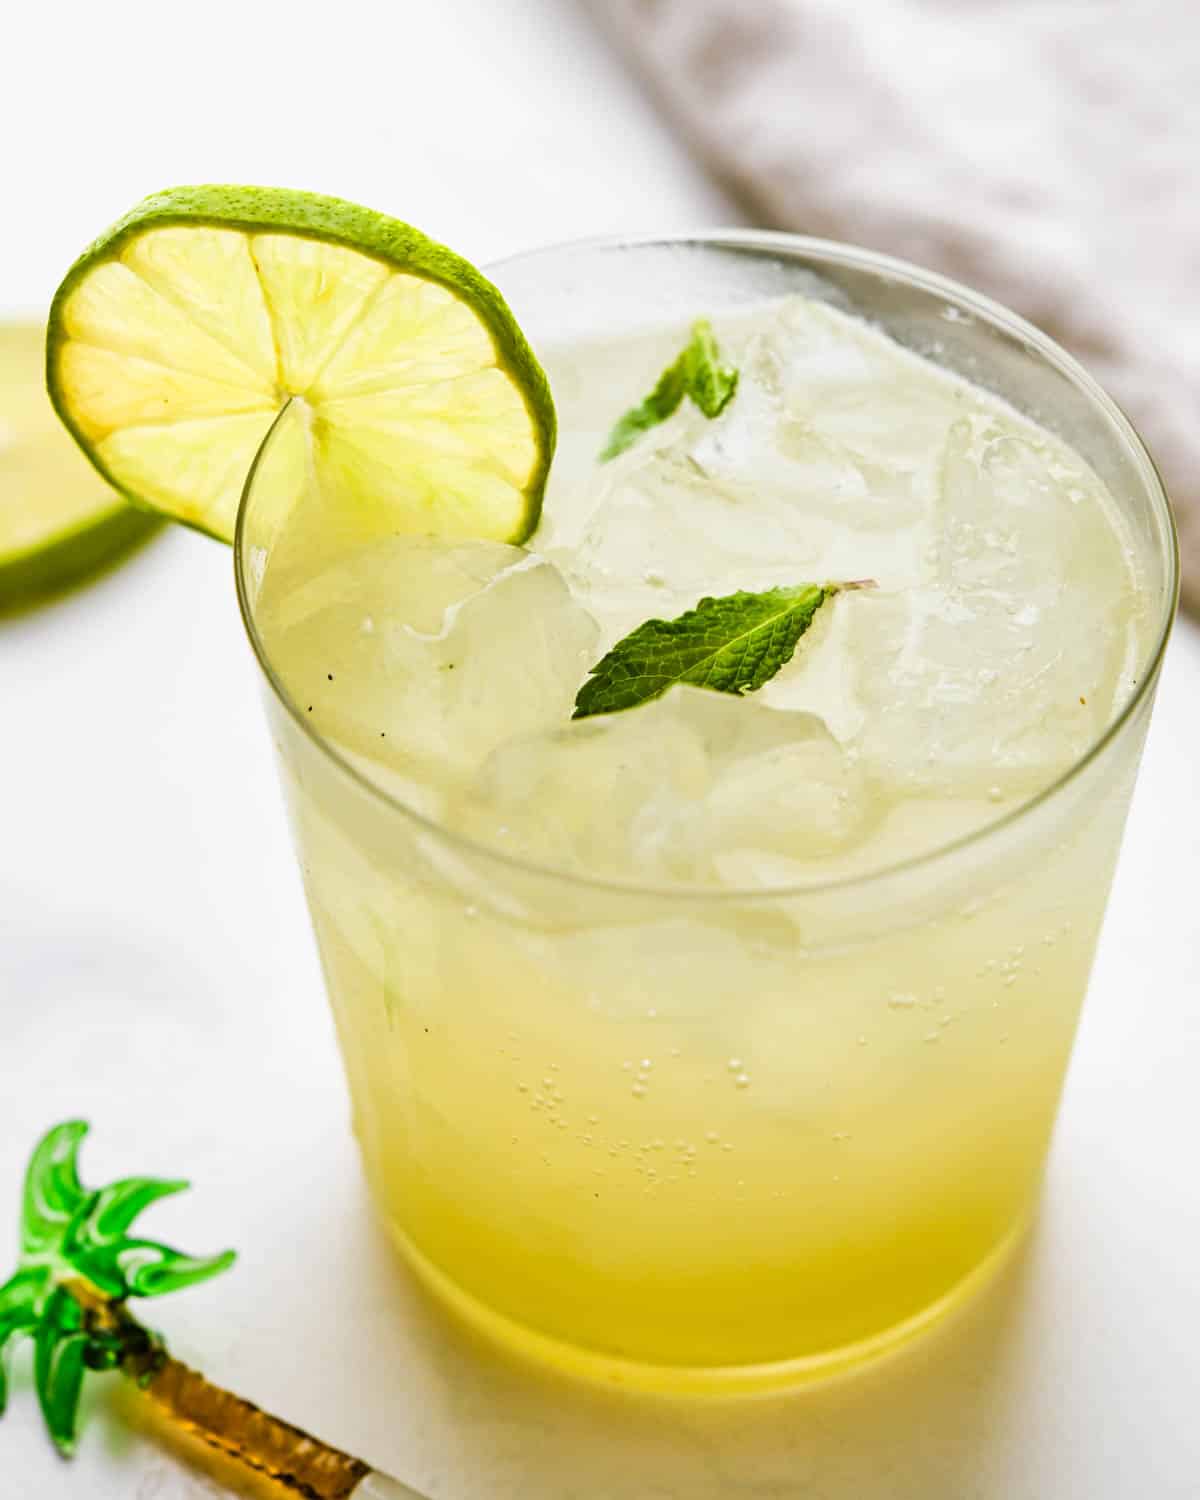 Serving an ice cold guava limeade with mint leaves.